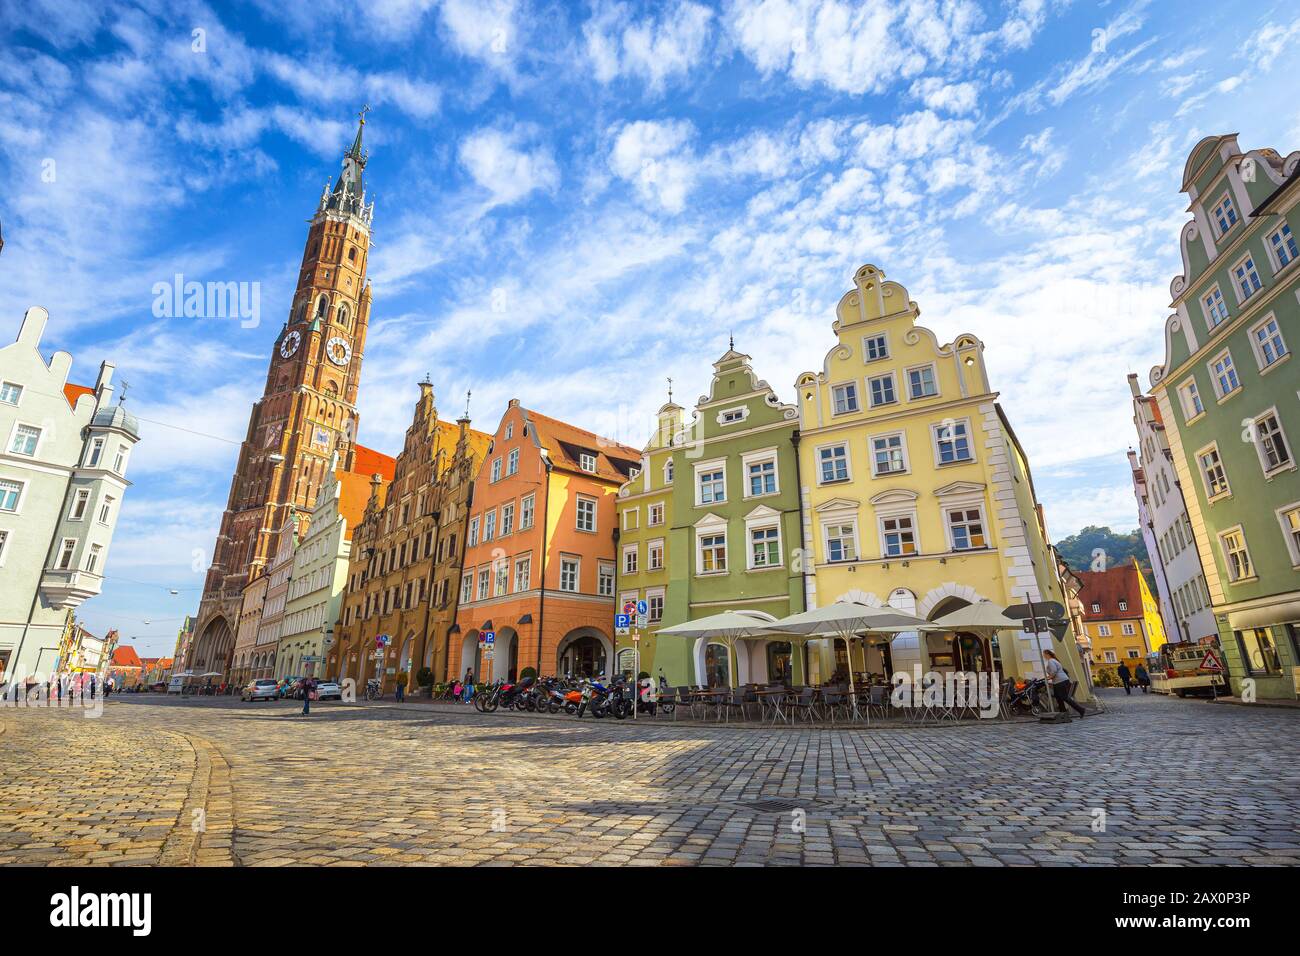 Scenic panoramic view of historic town of Landshut with traditional colorful houses and famous St. Martin's Church on a beautiful sunny day, Germany Stock Photo